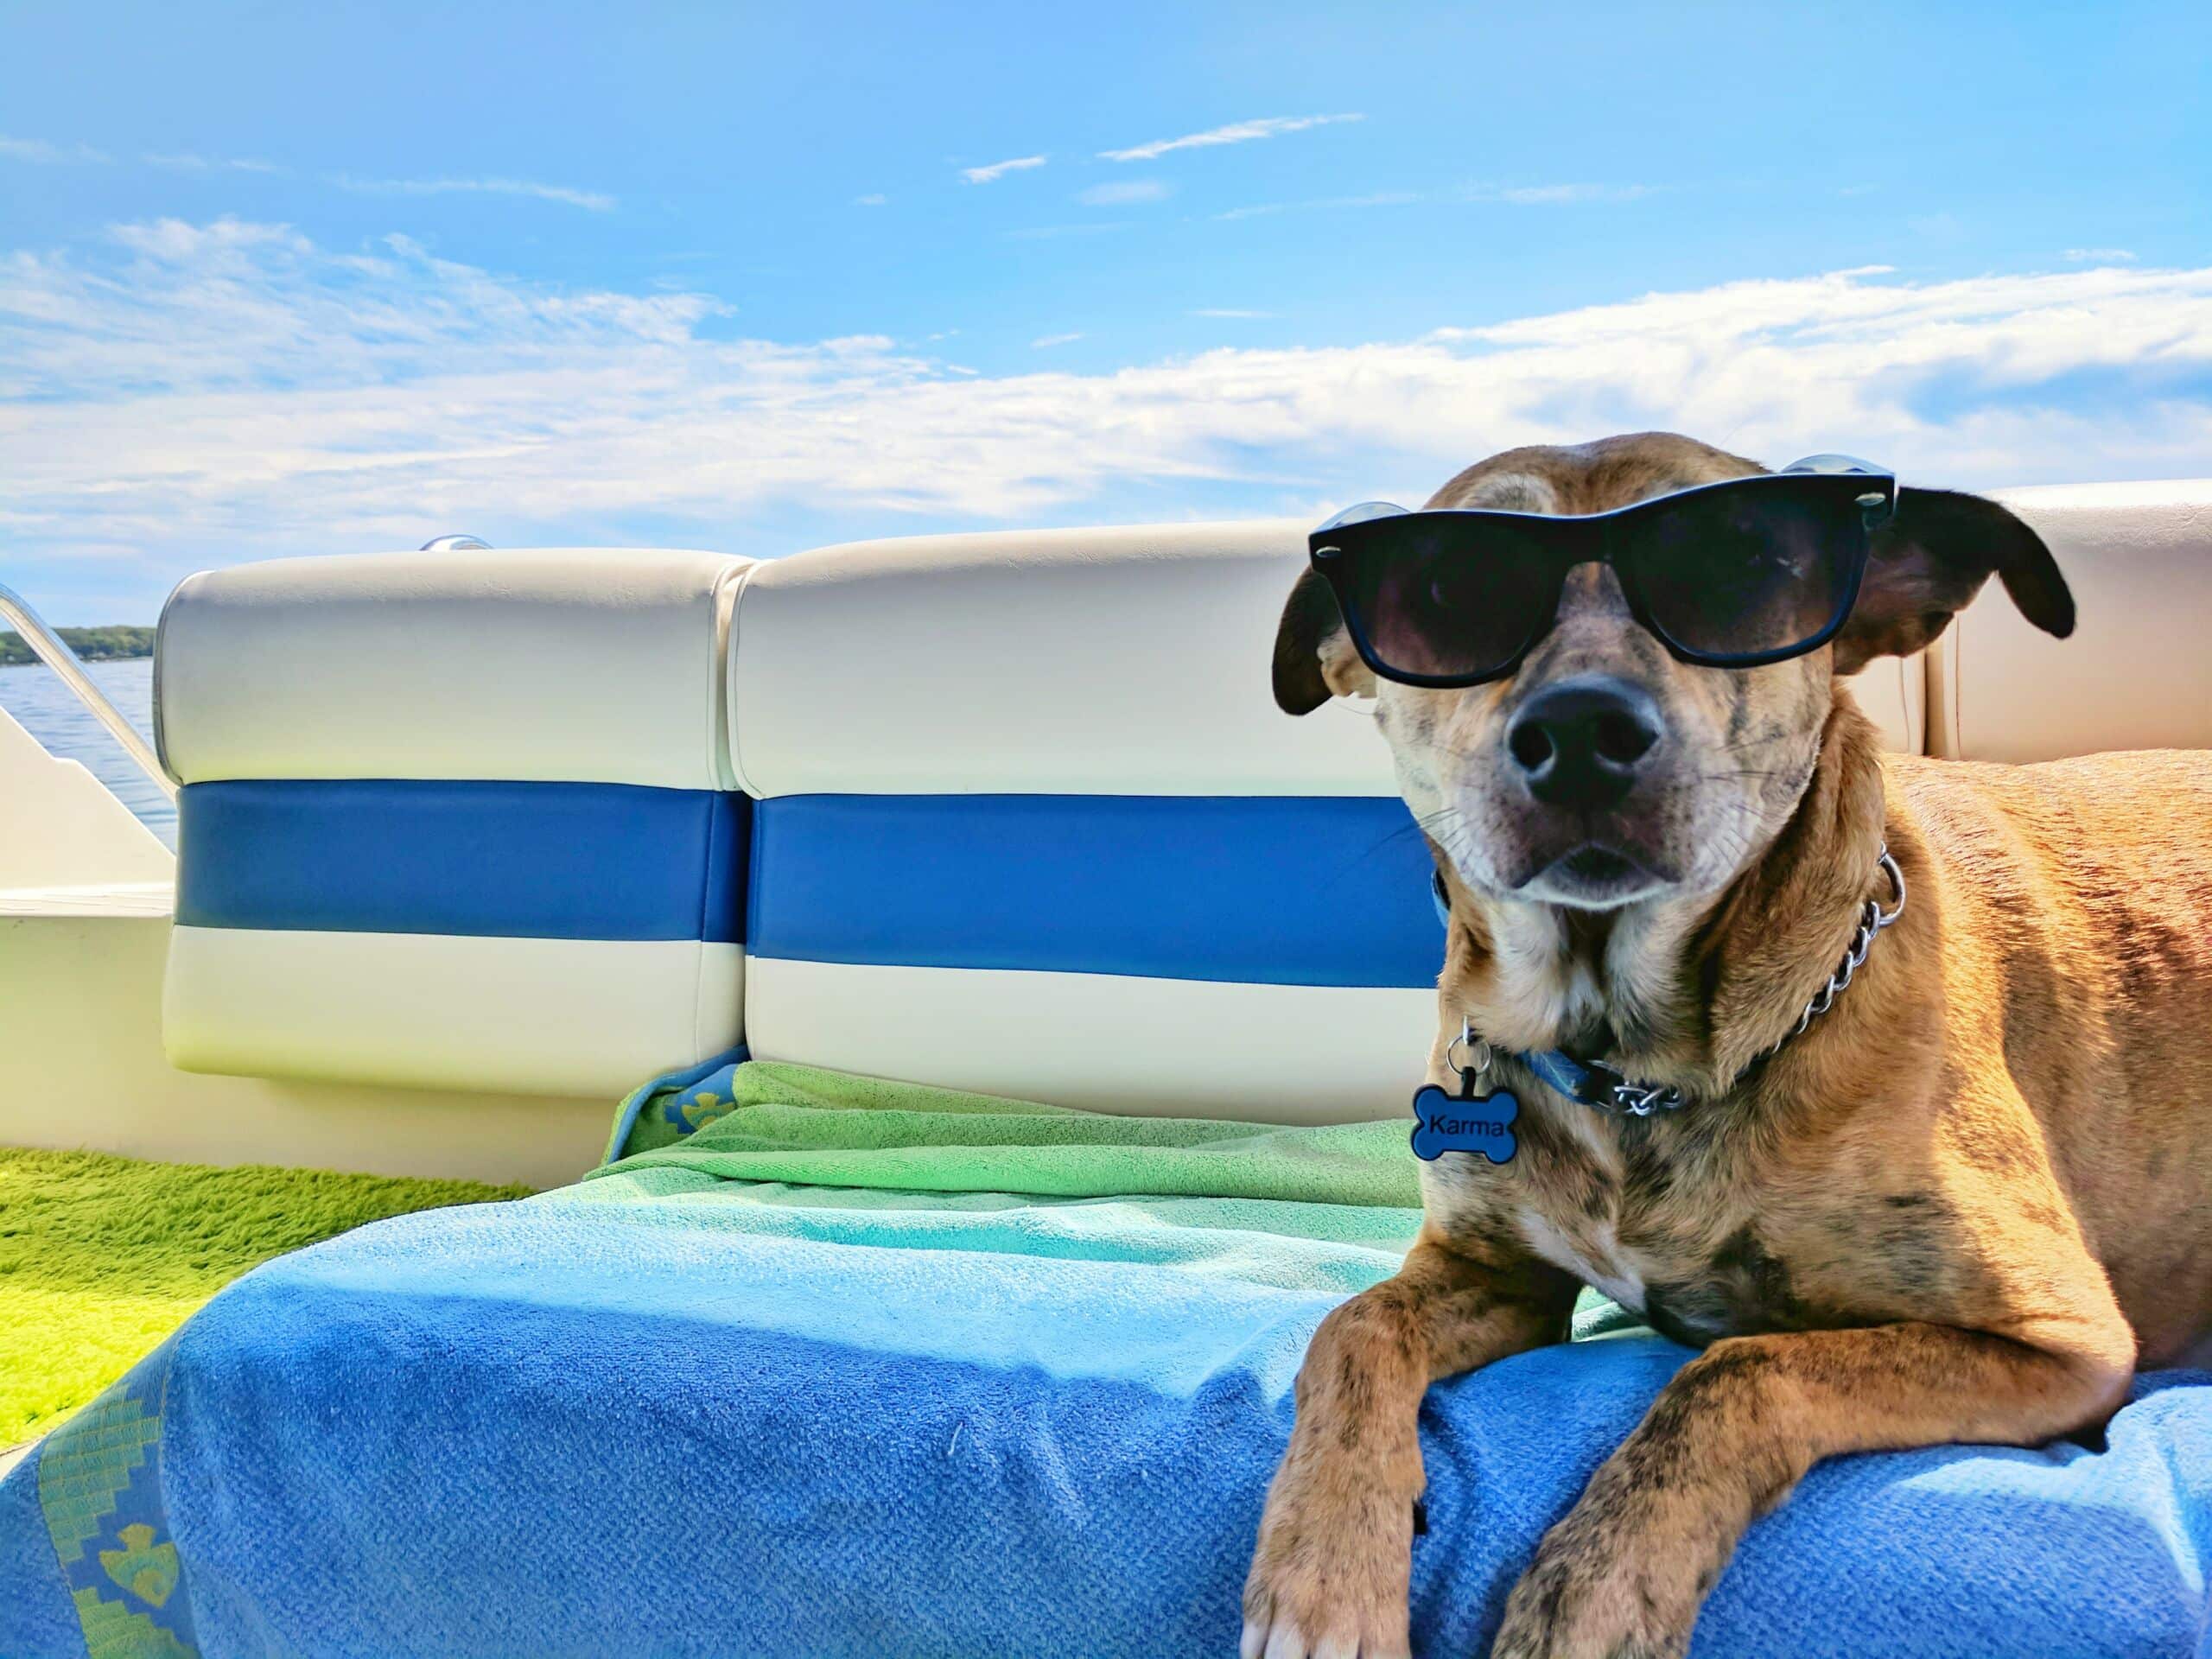 Pet-Friendly Holiday: Take the pets with you on your next holiday